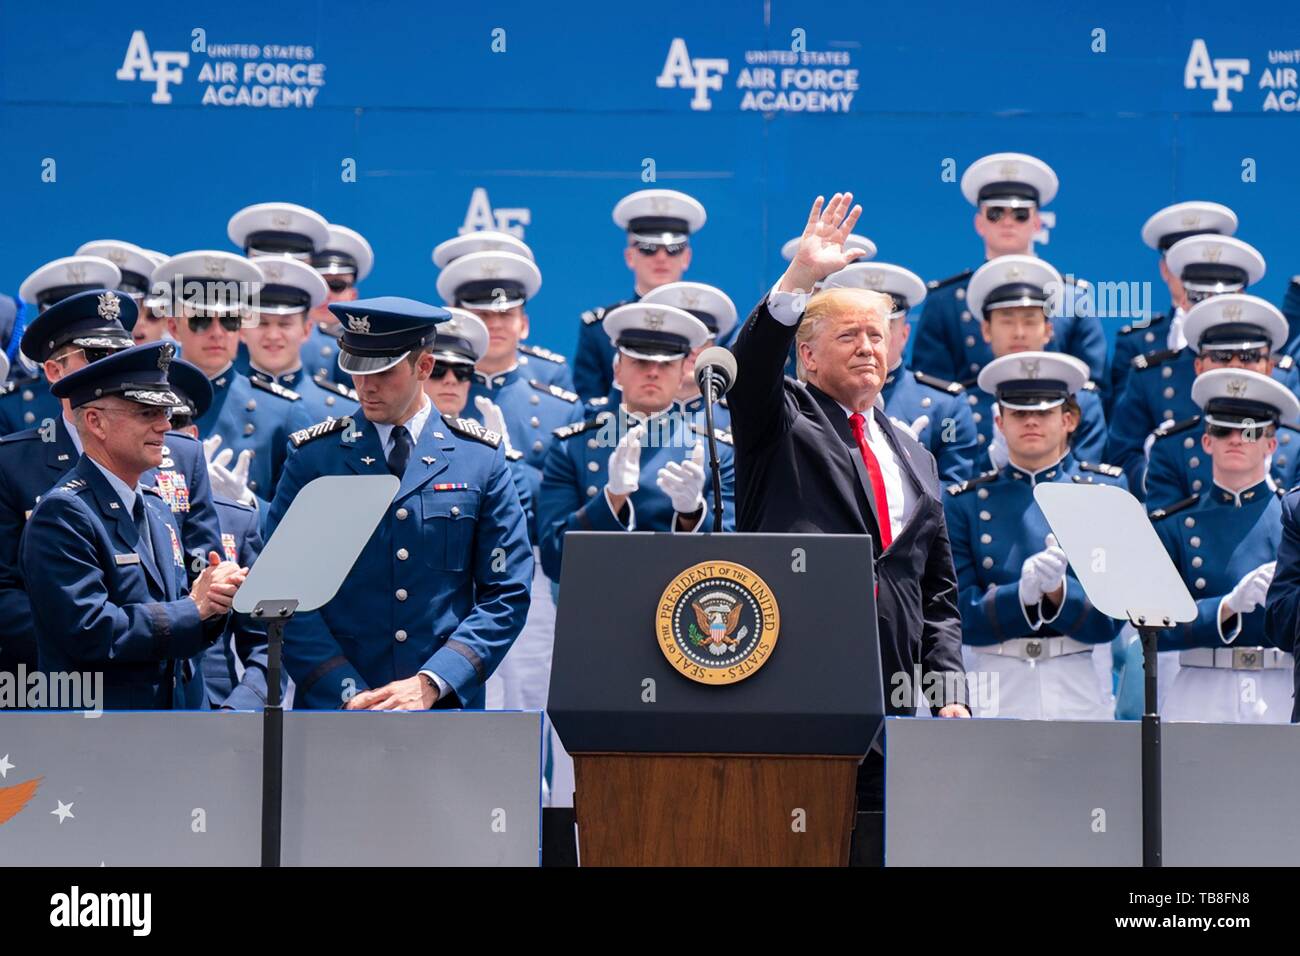 U.S President Donald Trump waves during the U.S. Air Force Academy Graduation Ceremony at the USAF Academy Falcon Stadium May 30, 2019 in Colorado Springs, Colorado. Credit: Planetpix/Alamy Live News Stock Photo